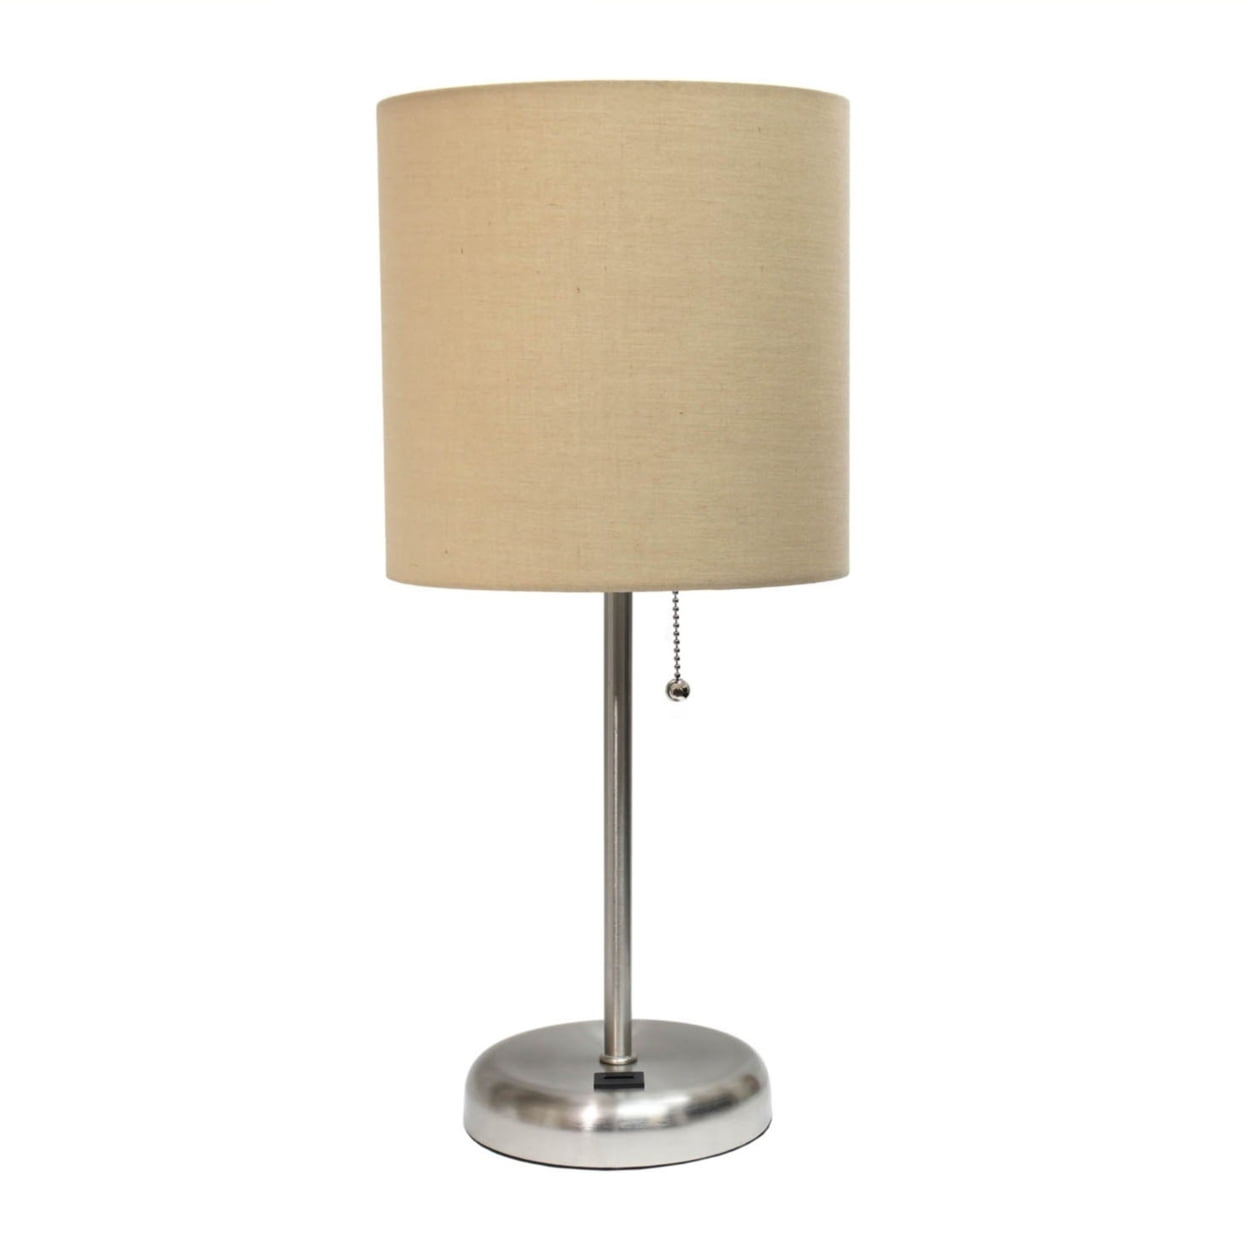 Lt2044-tan Stick Table Lamp With Usb Charging Port & Fabric Shade, Tan